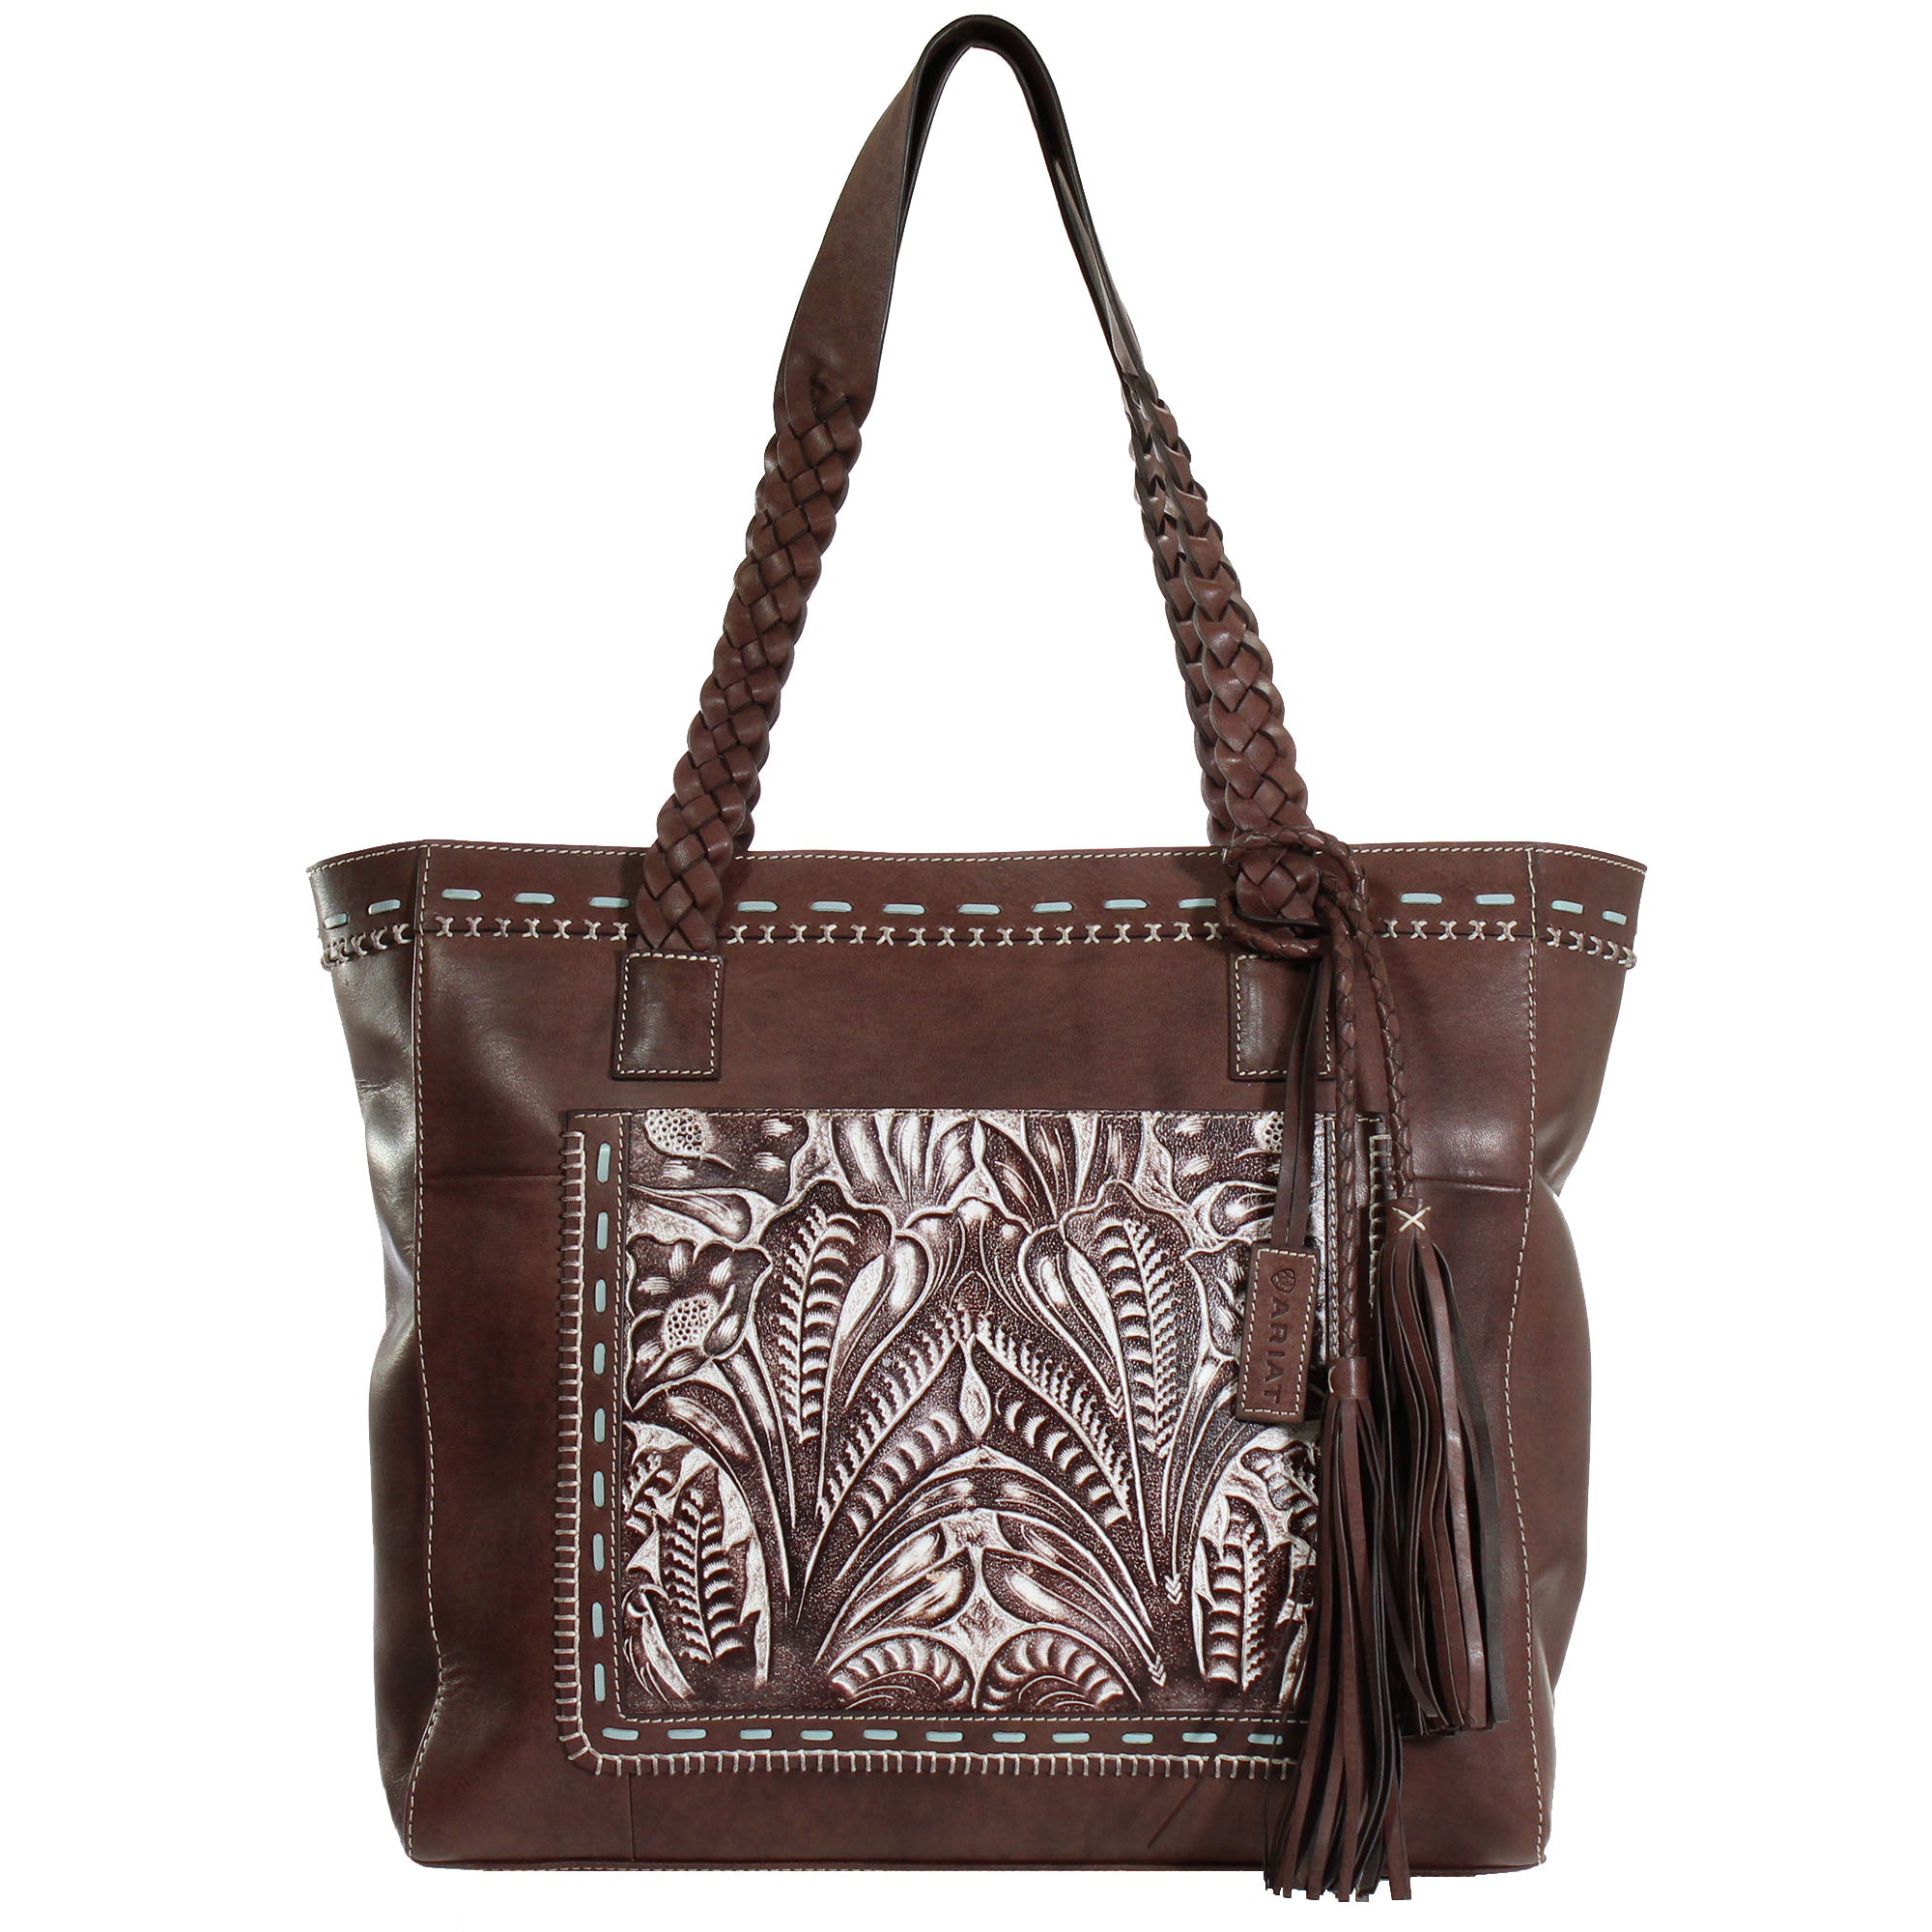 Ariat Rori Style Conceal Carry Tote